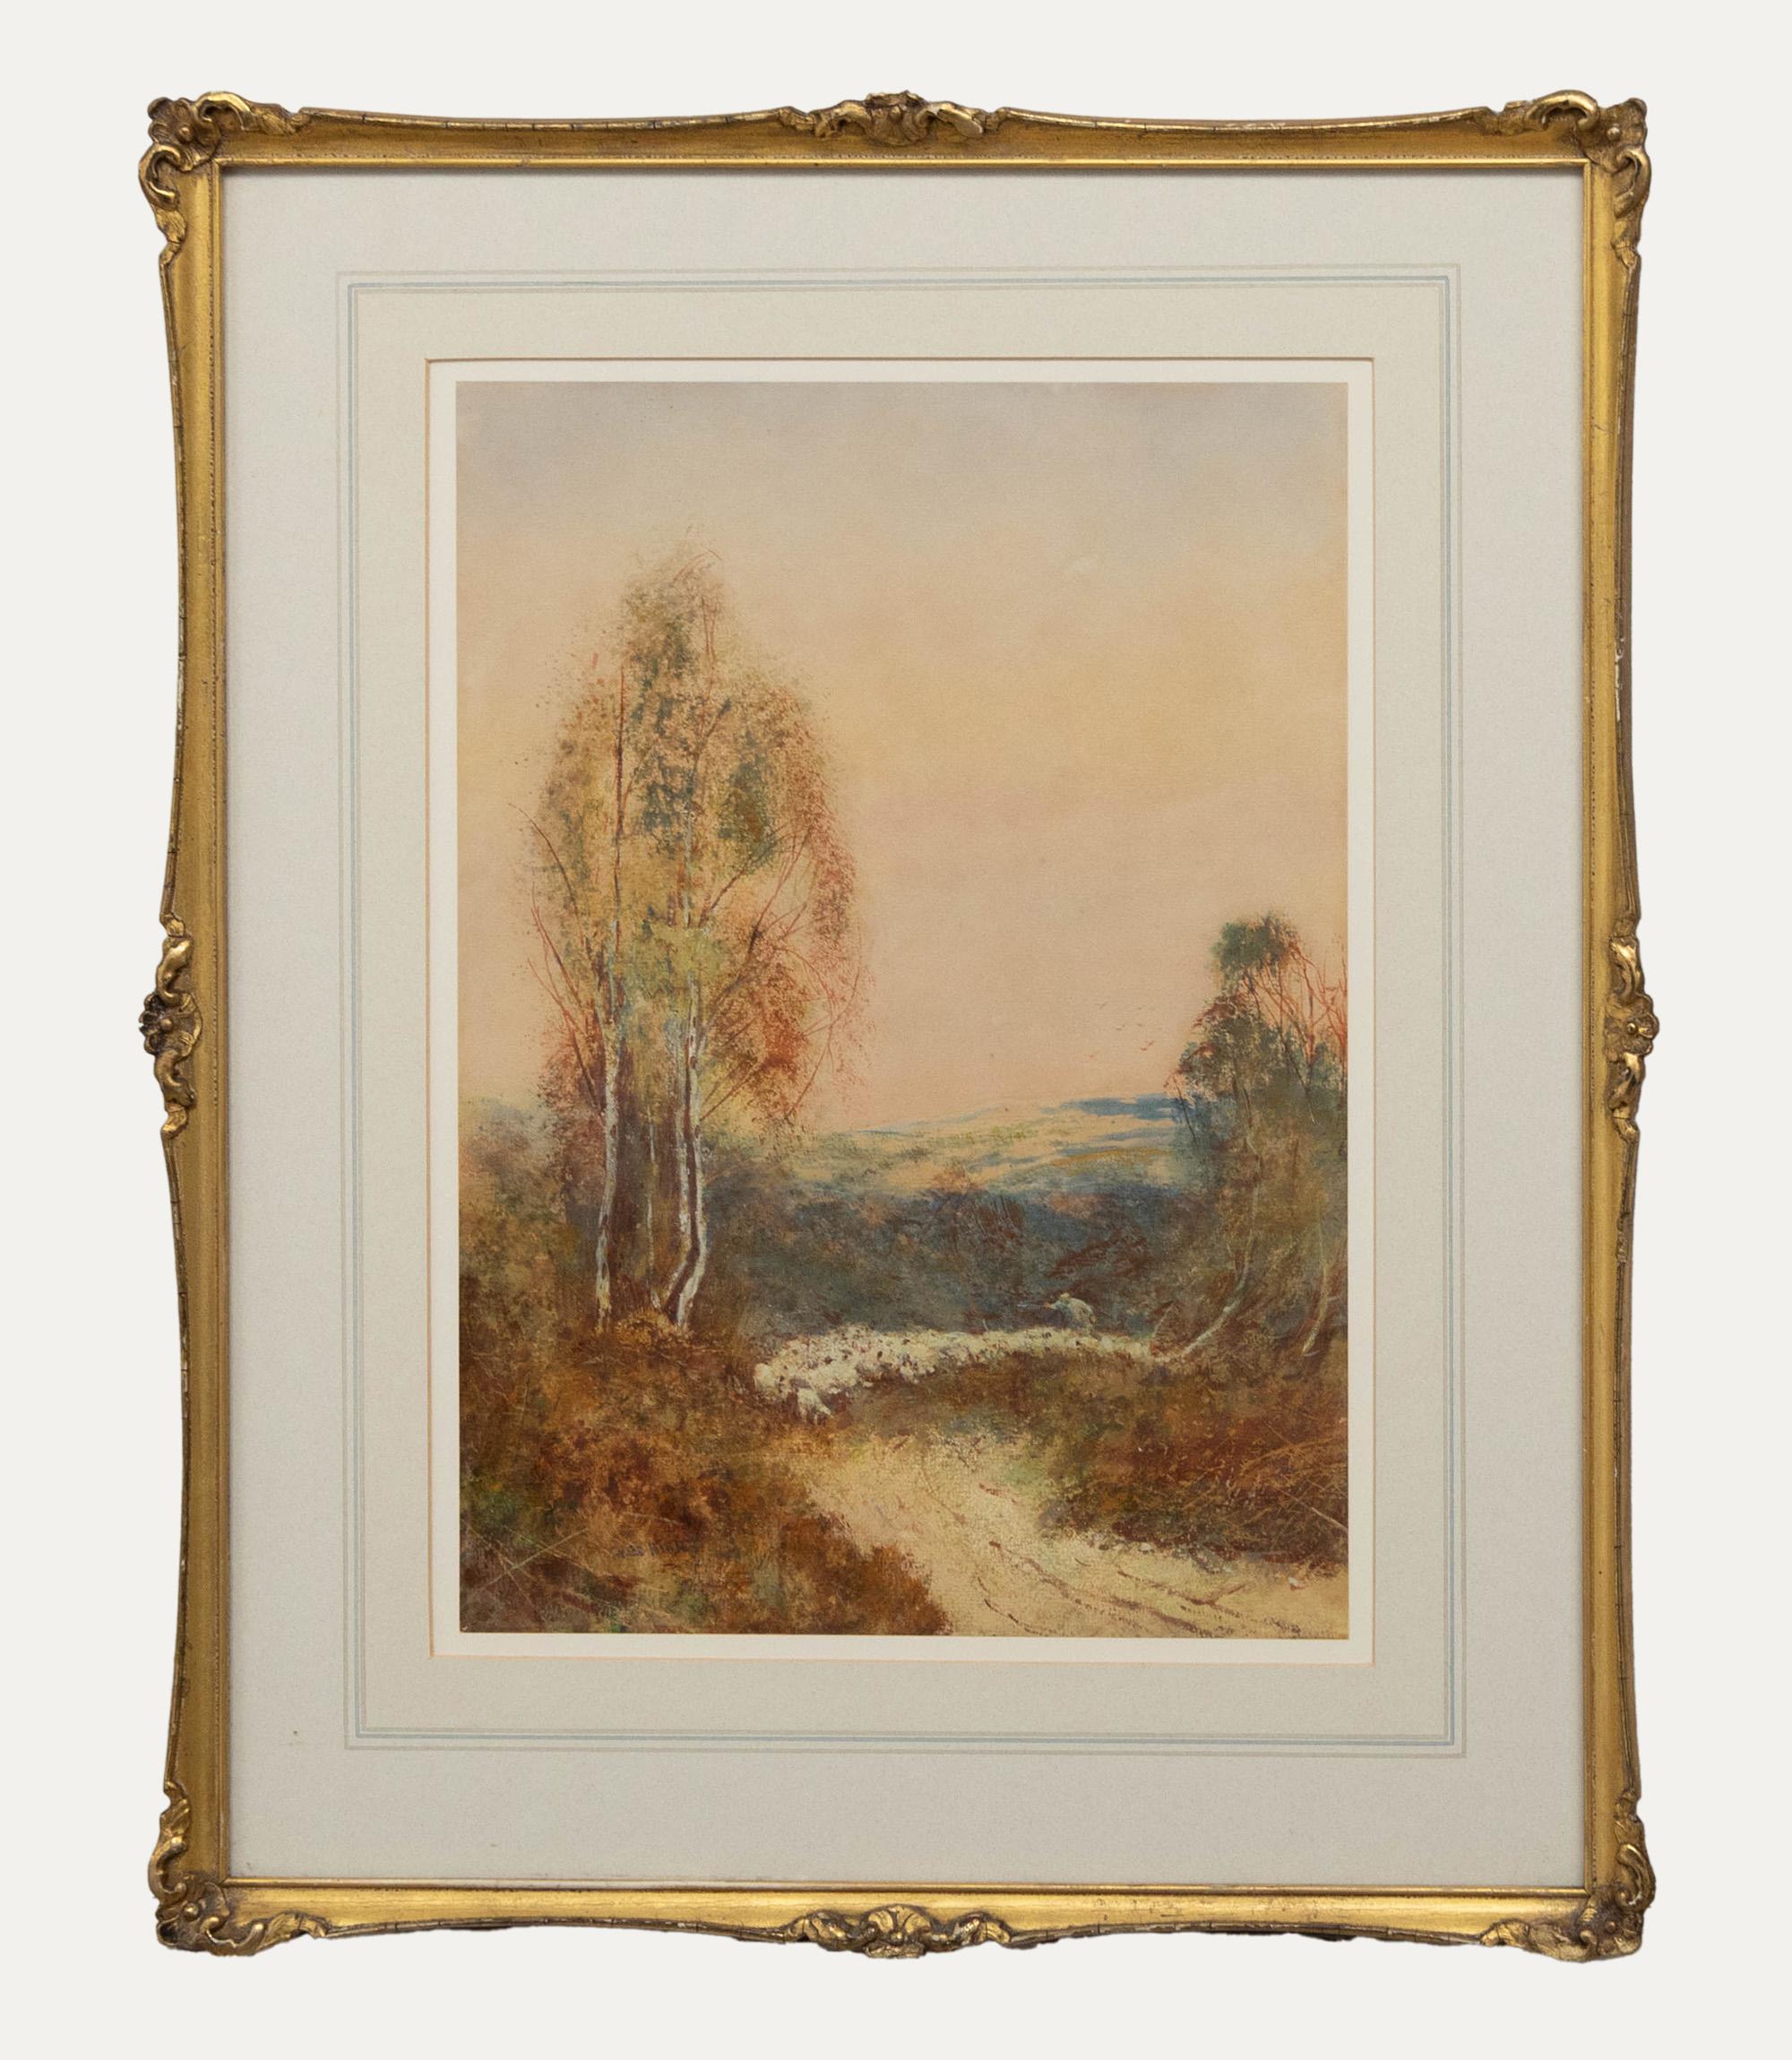 An idyllic watercolour with body colour depicting a shepherd herding sheep down a quiet country lane. Presented in a beautiful gilt and swept frame with floral and acanthus ornamentation. Signed lower left. On paper.